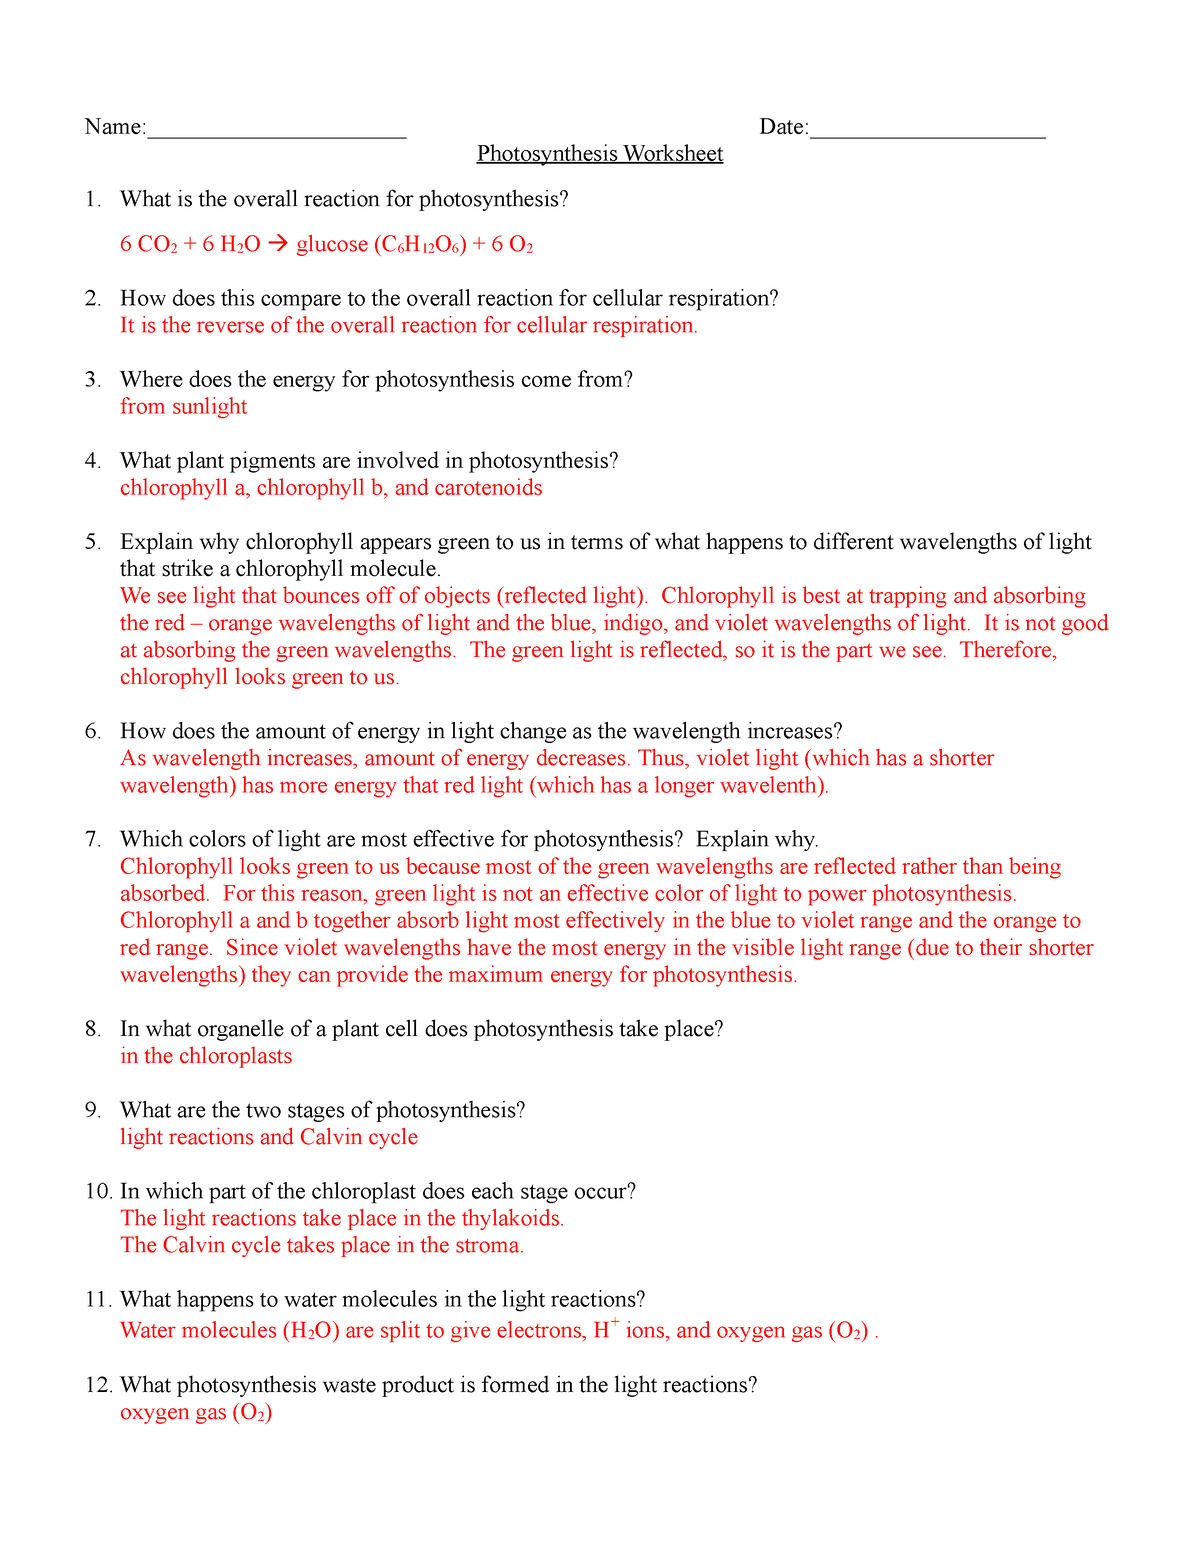 biology 20 photosynthesis worksheet answers